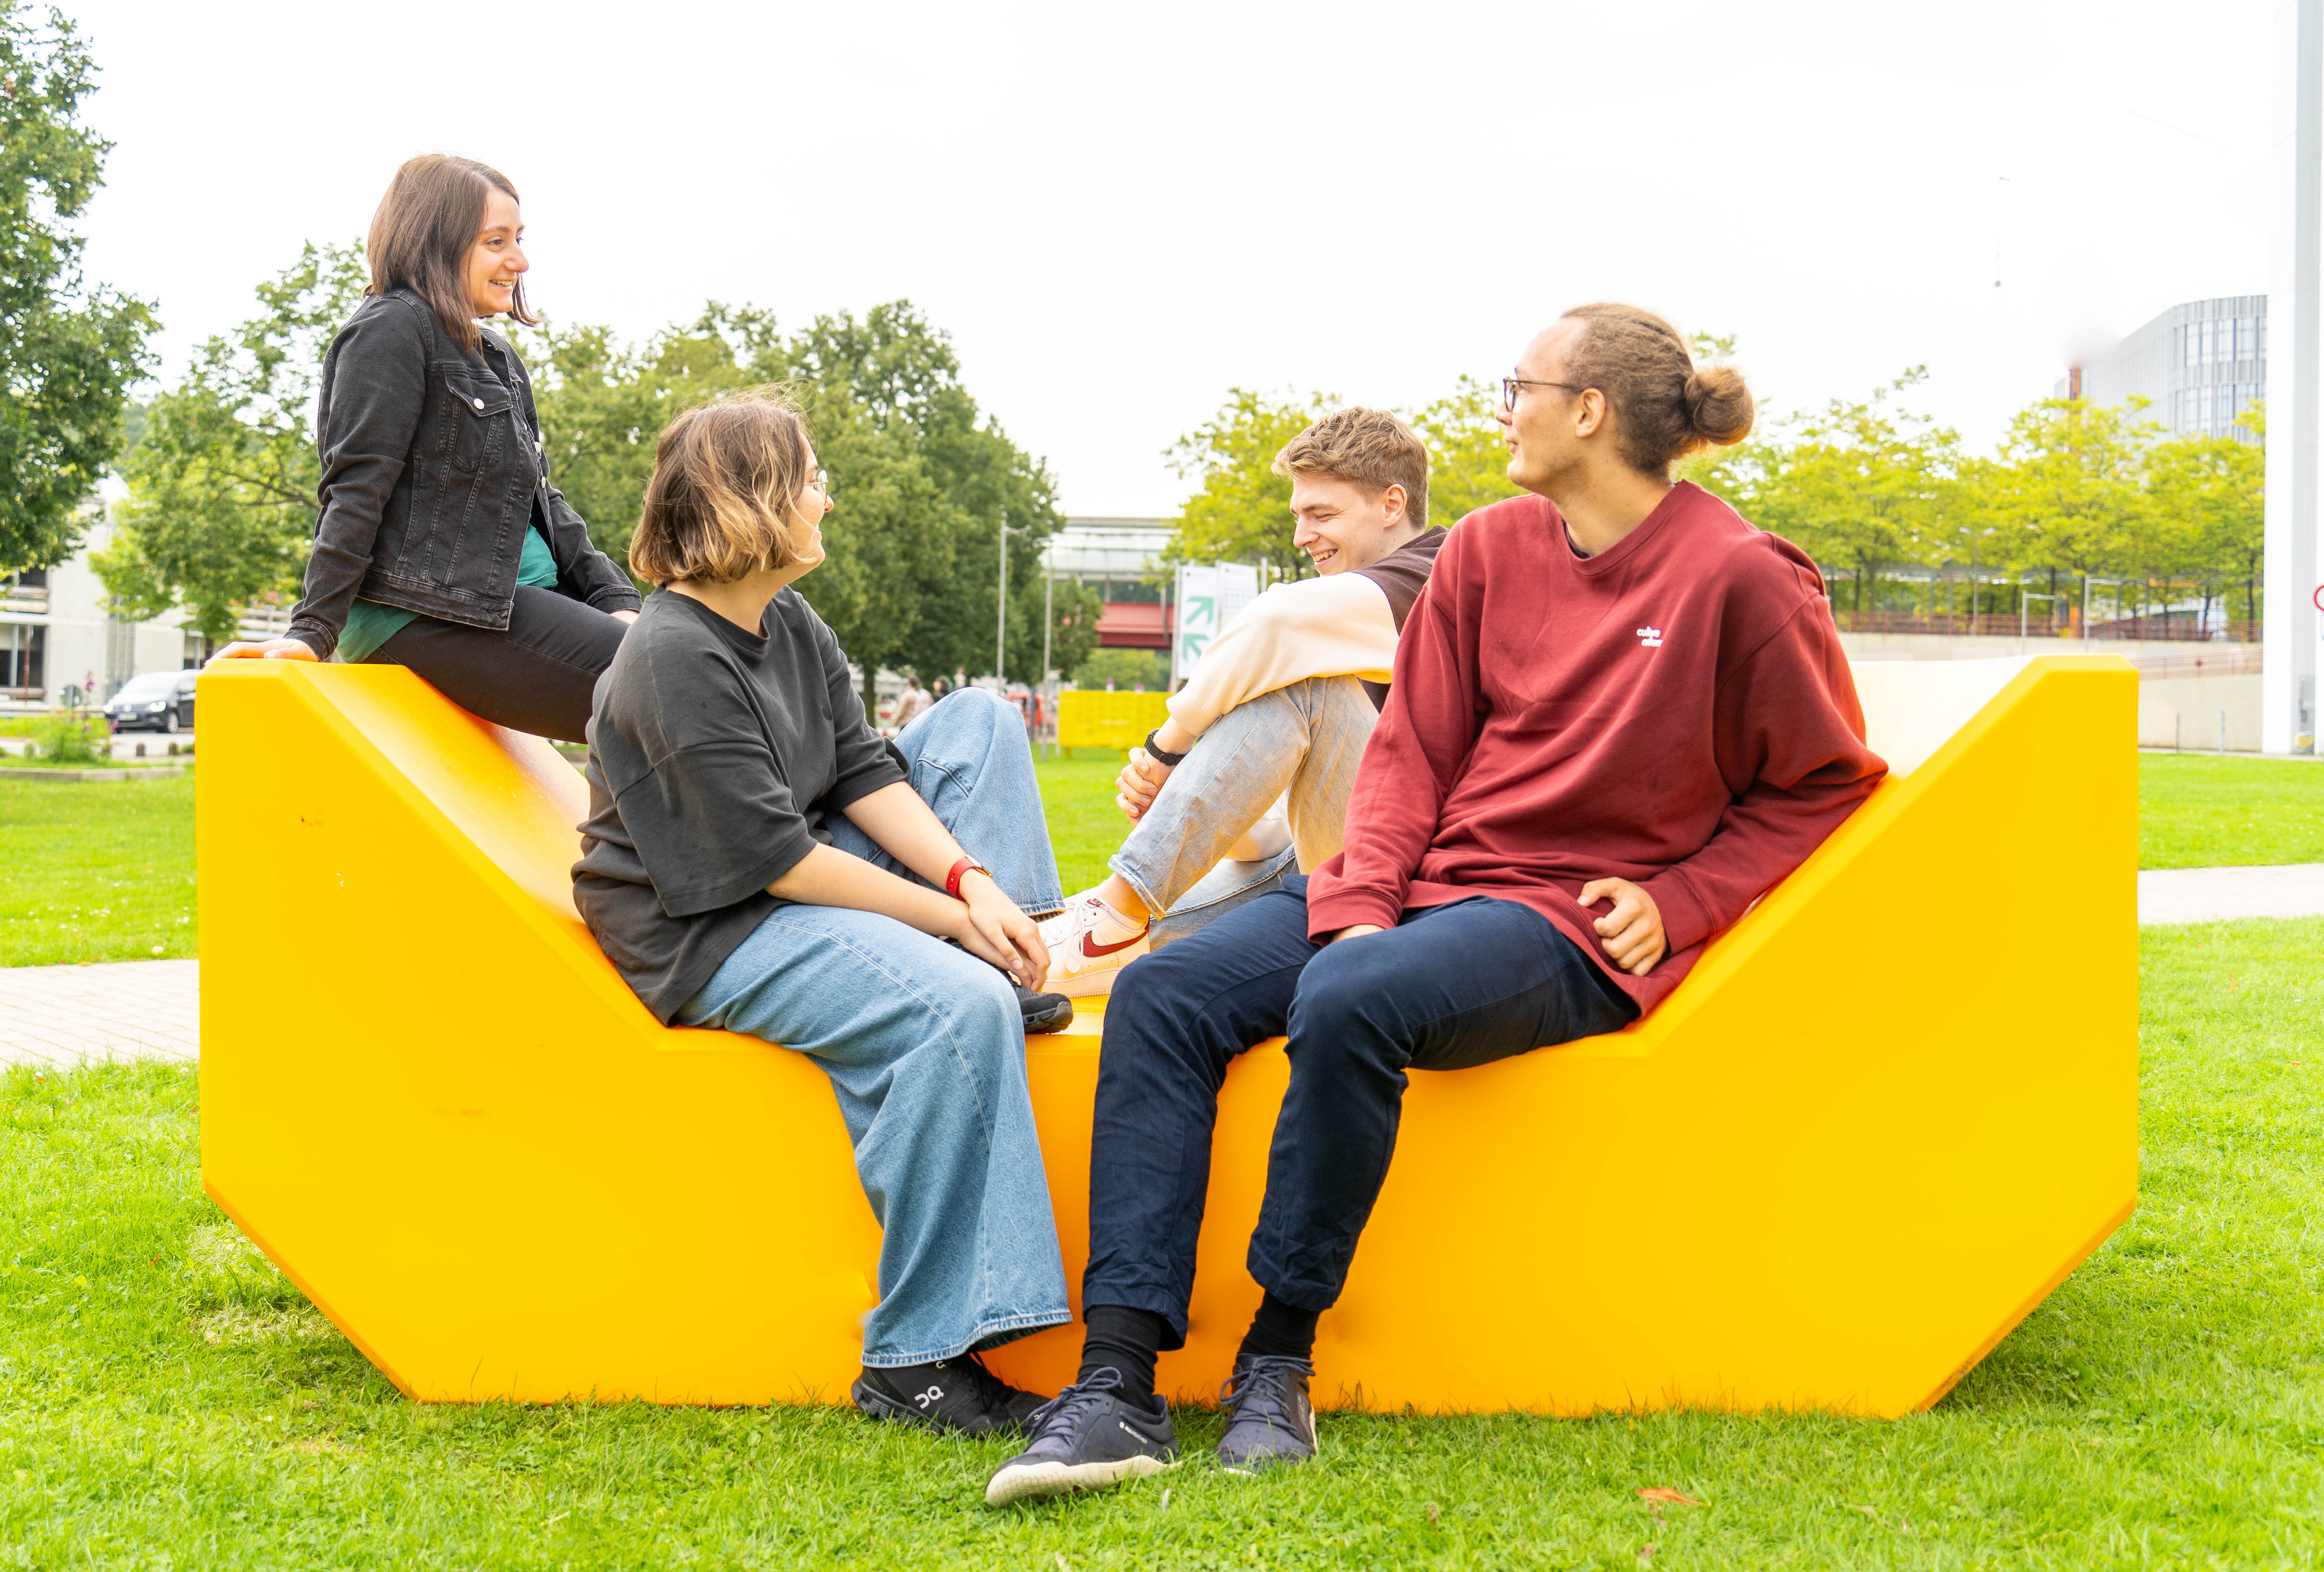 Four staff, people sitting on a yellow piece of seating furniture